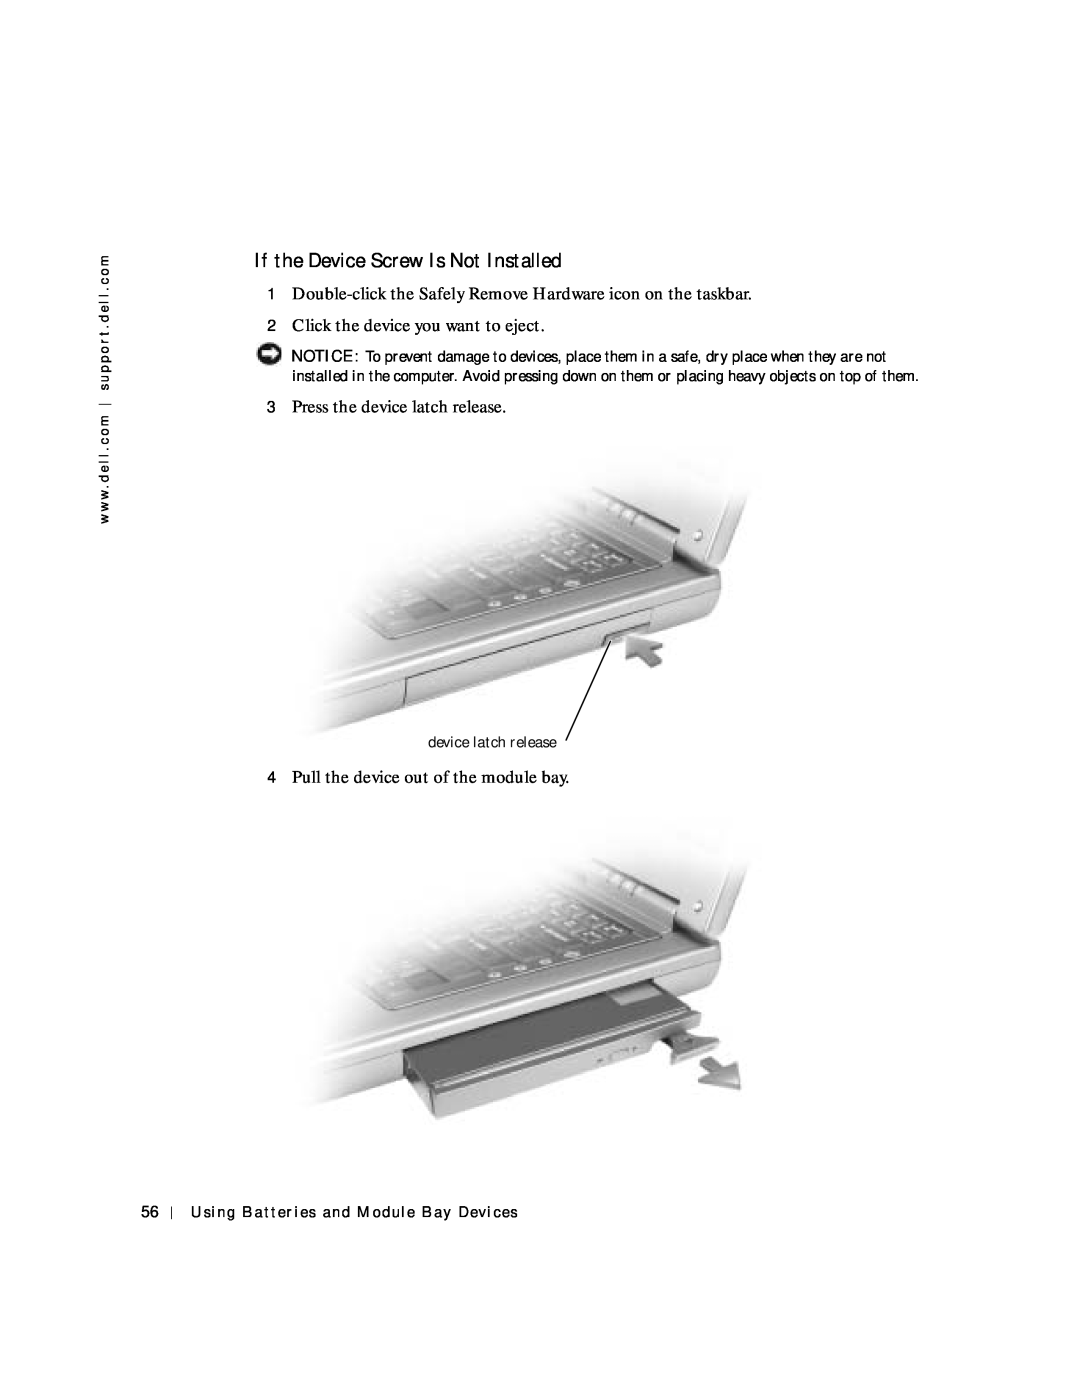 Dell 8600 manual If the Device Screw Is Not Installed, Double-click the Safely Remove Hardware icon on the taskbar 